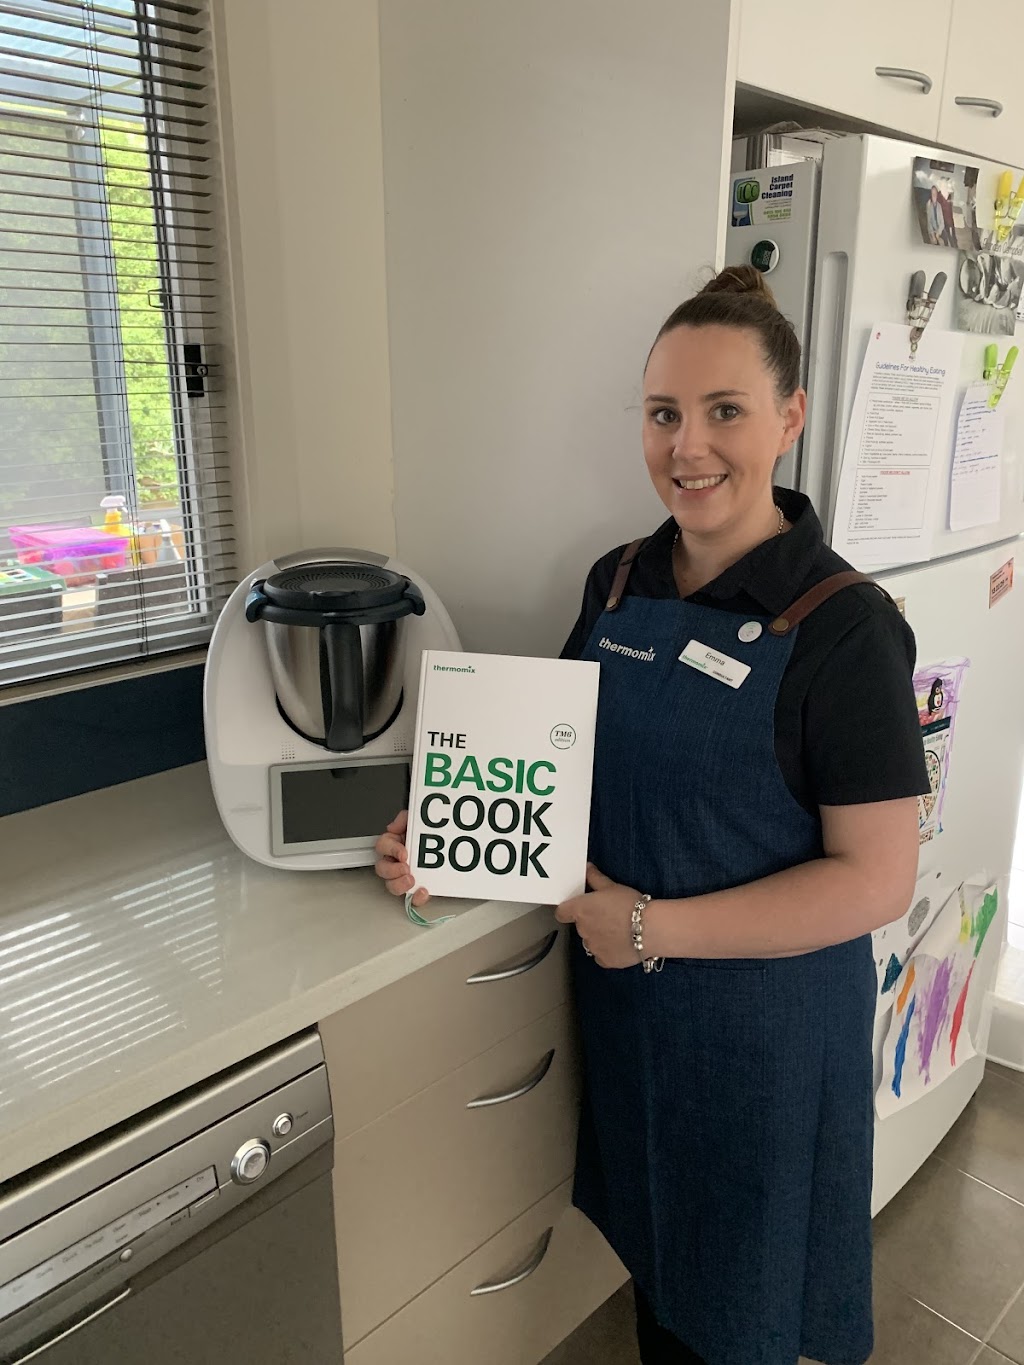 Thermomentor- Emma ODonnell, Thermomix Consultant |  | Grevillea Ave, Cowes VIC 3922, Australia | 0417520757 OR +61 417 520 757